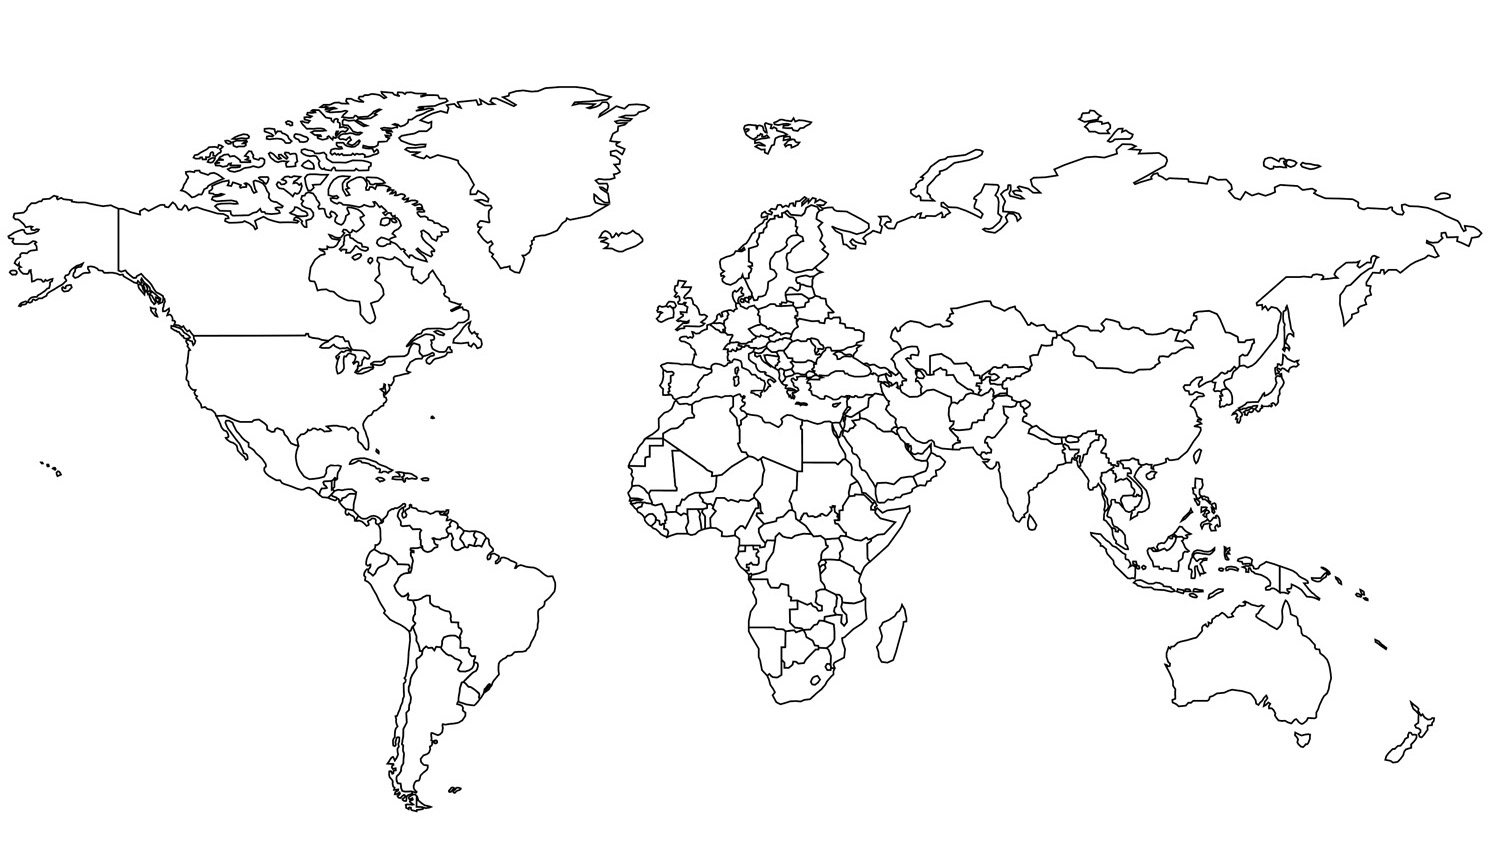 Map of the world showing continents and countries.